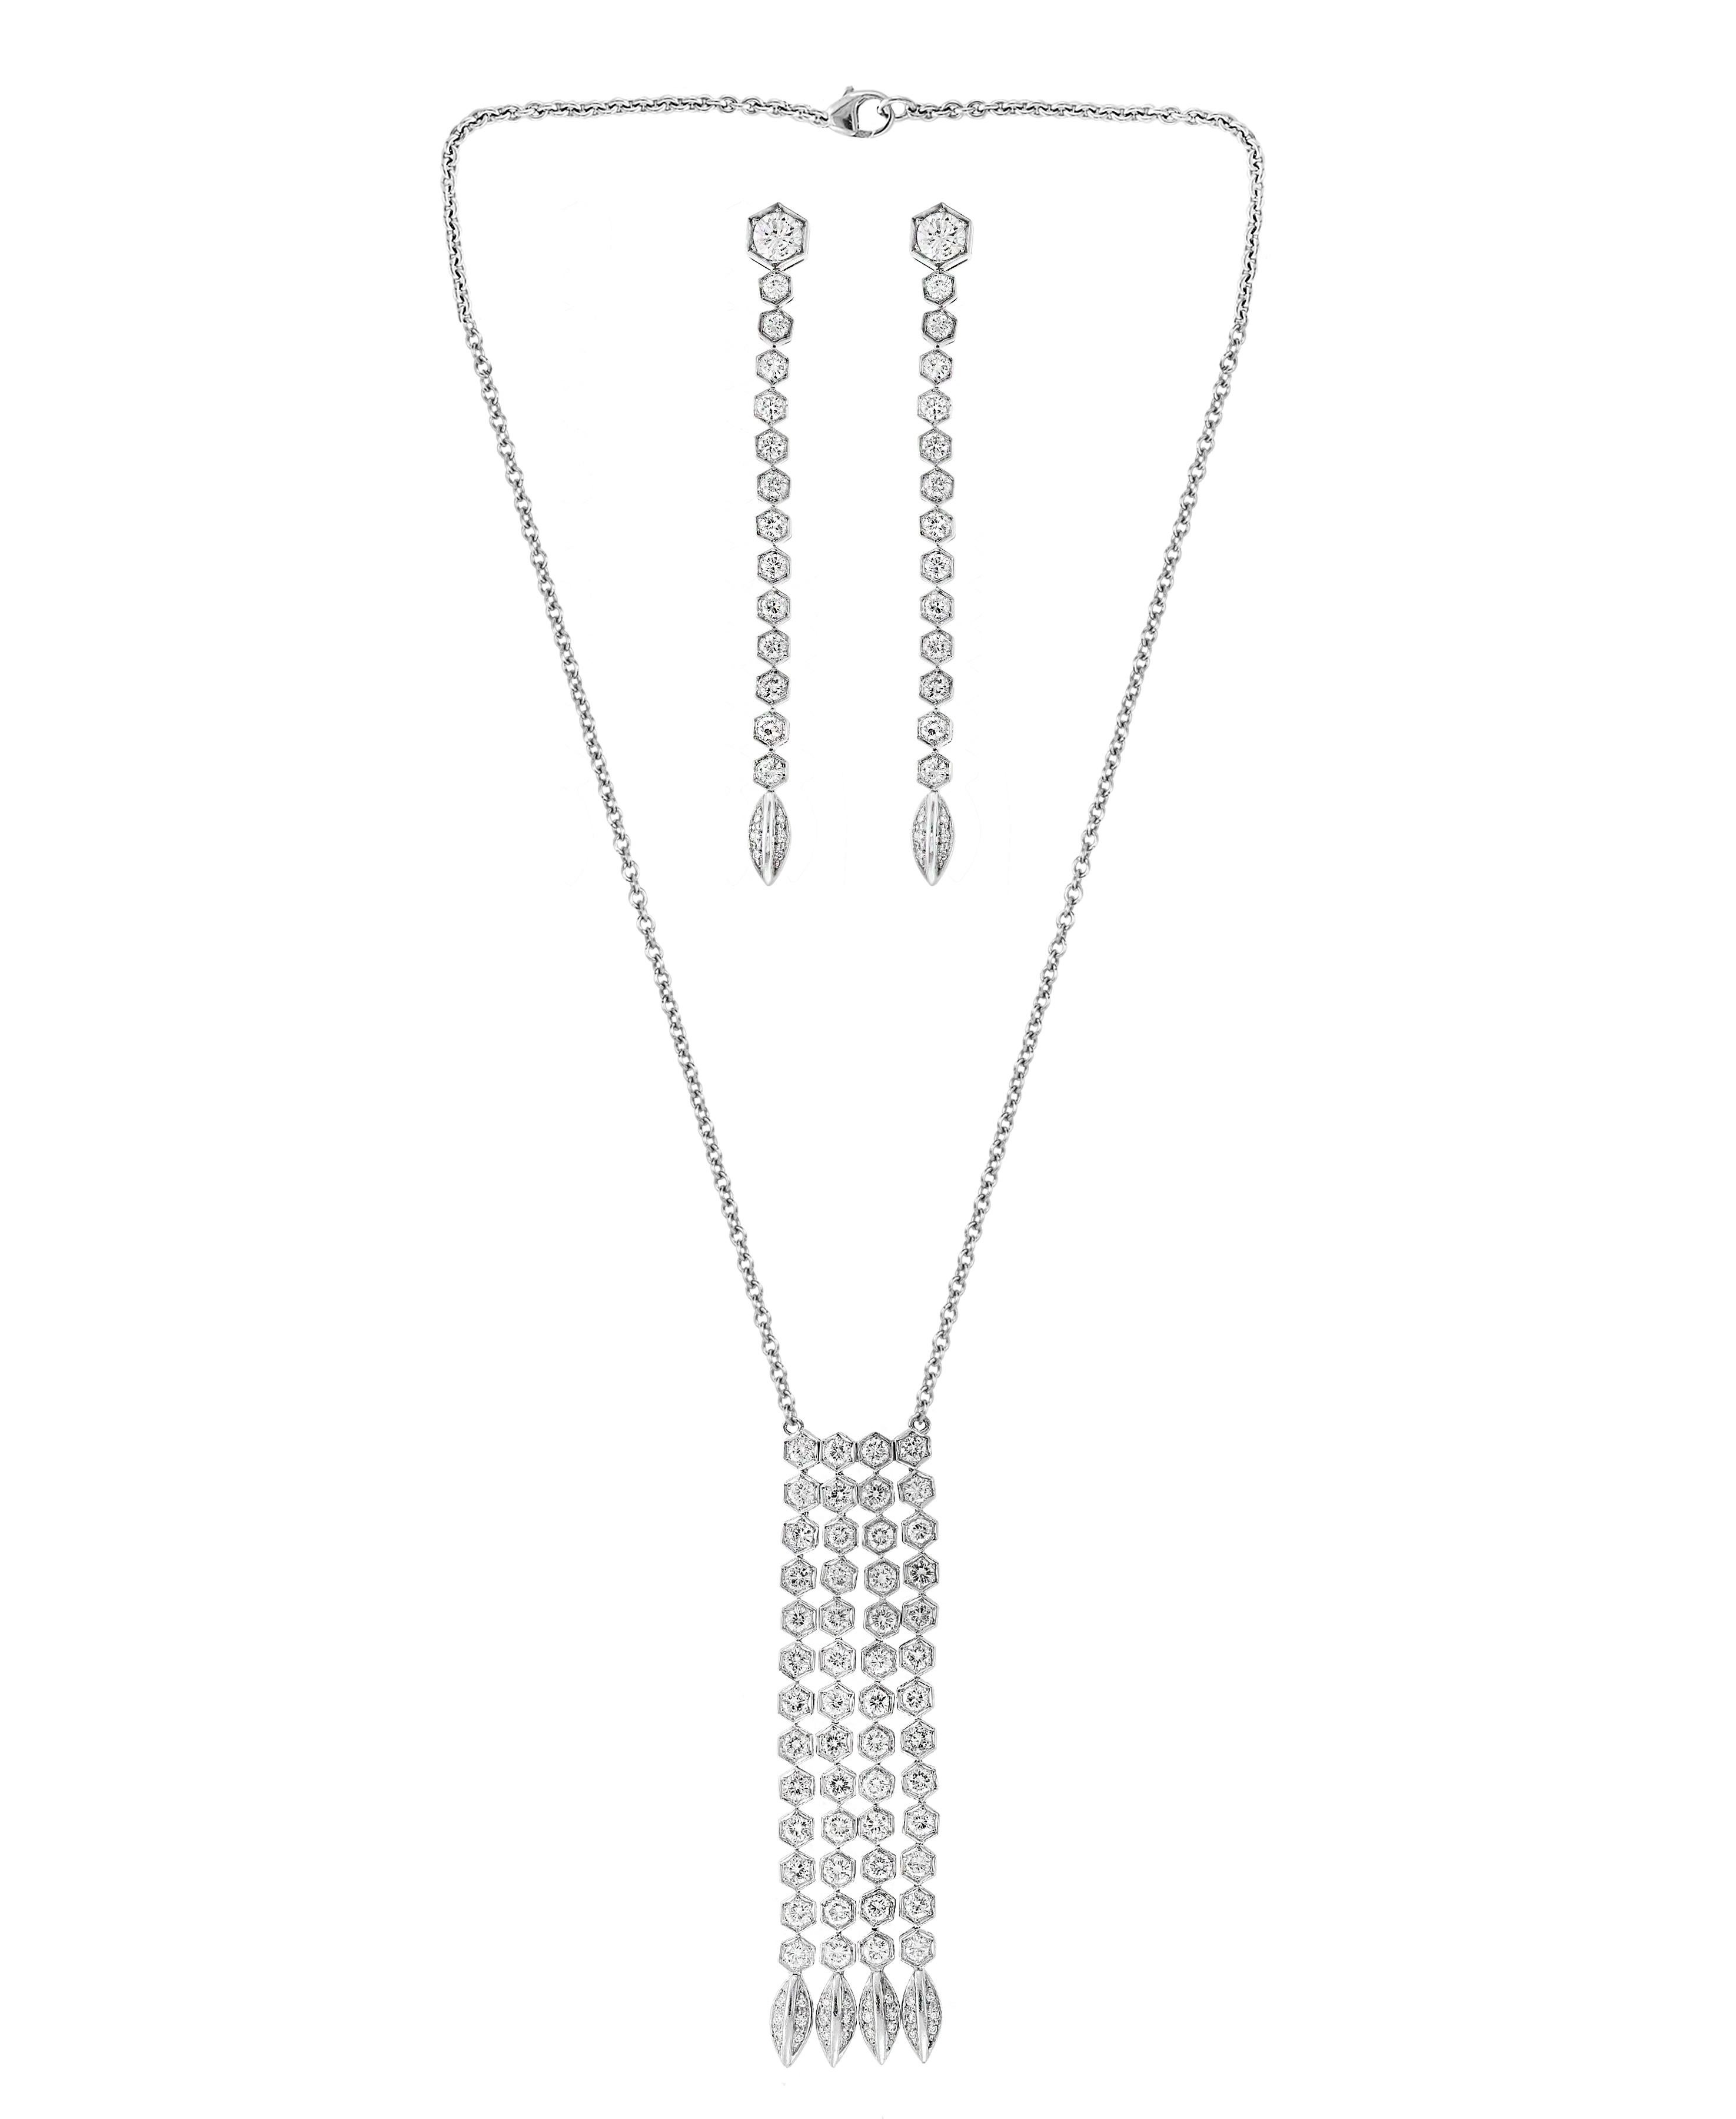 12 Carat Diamond Line Necklace and Line Earring Suite in 18 Karat White Gold 3